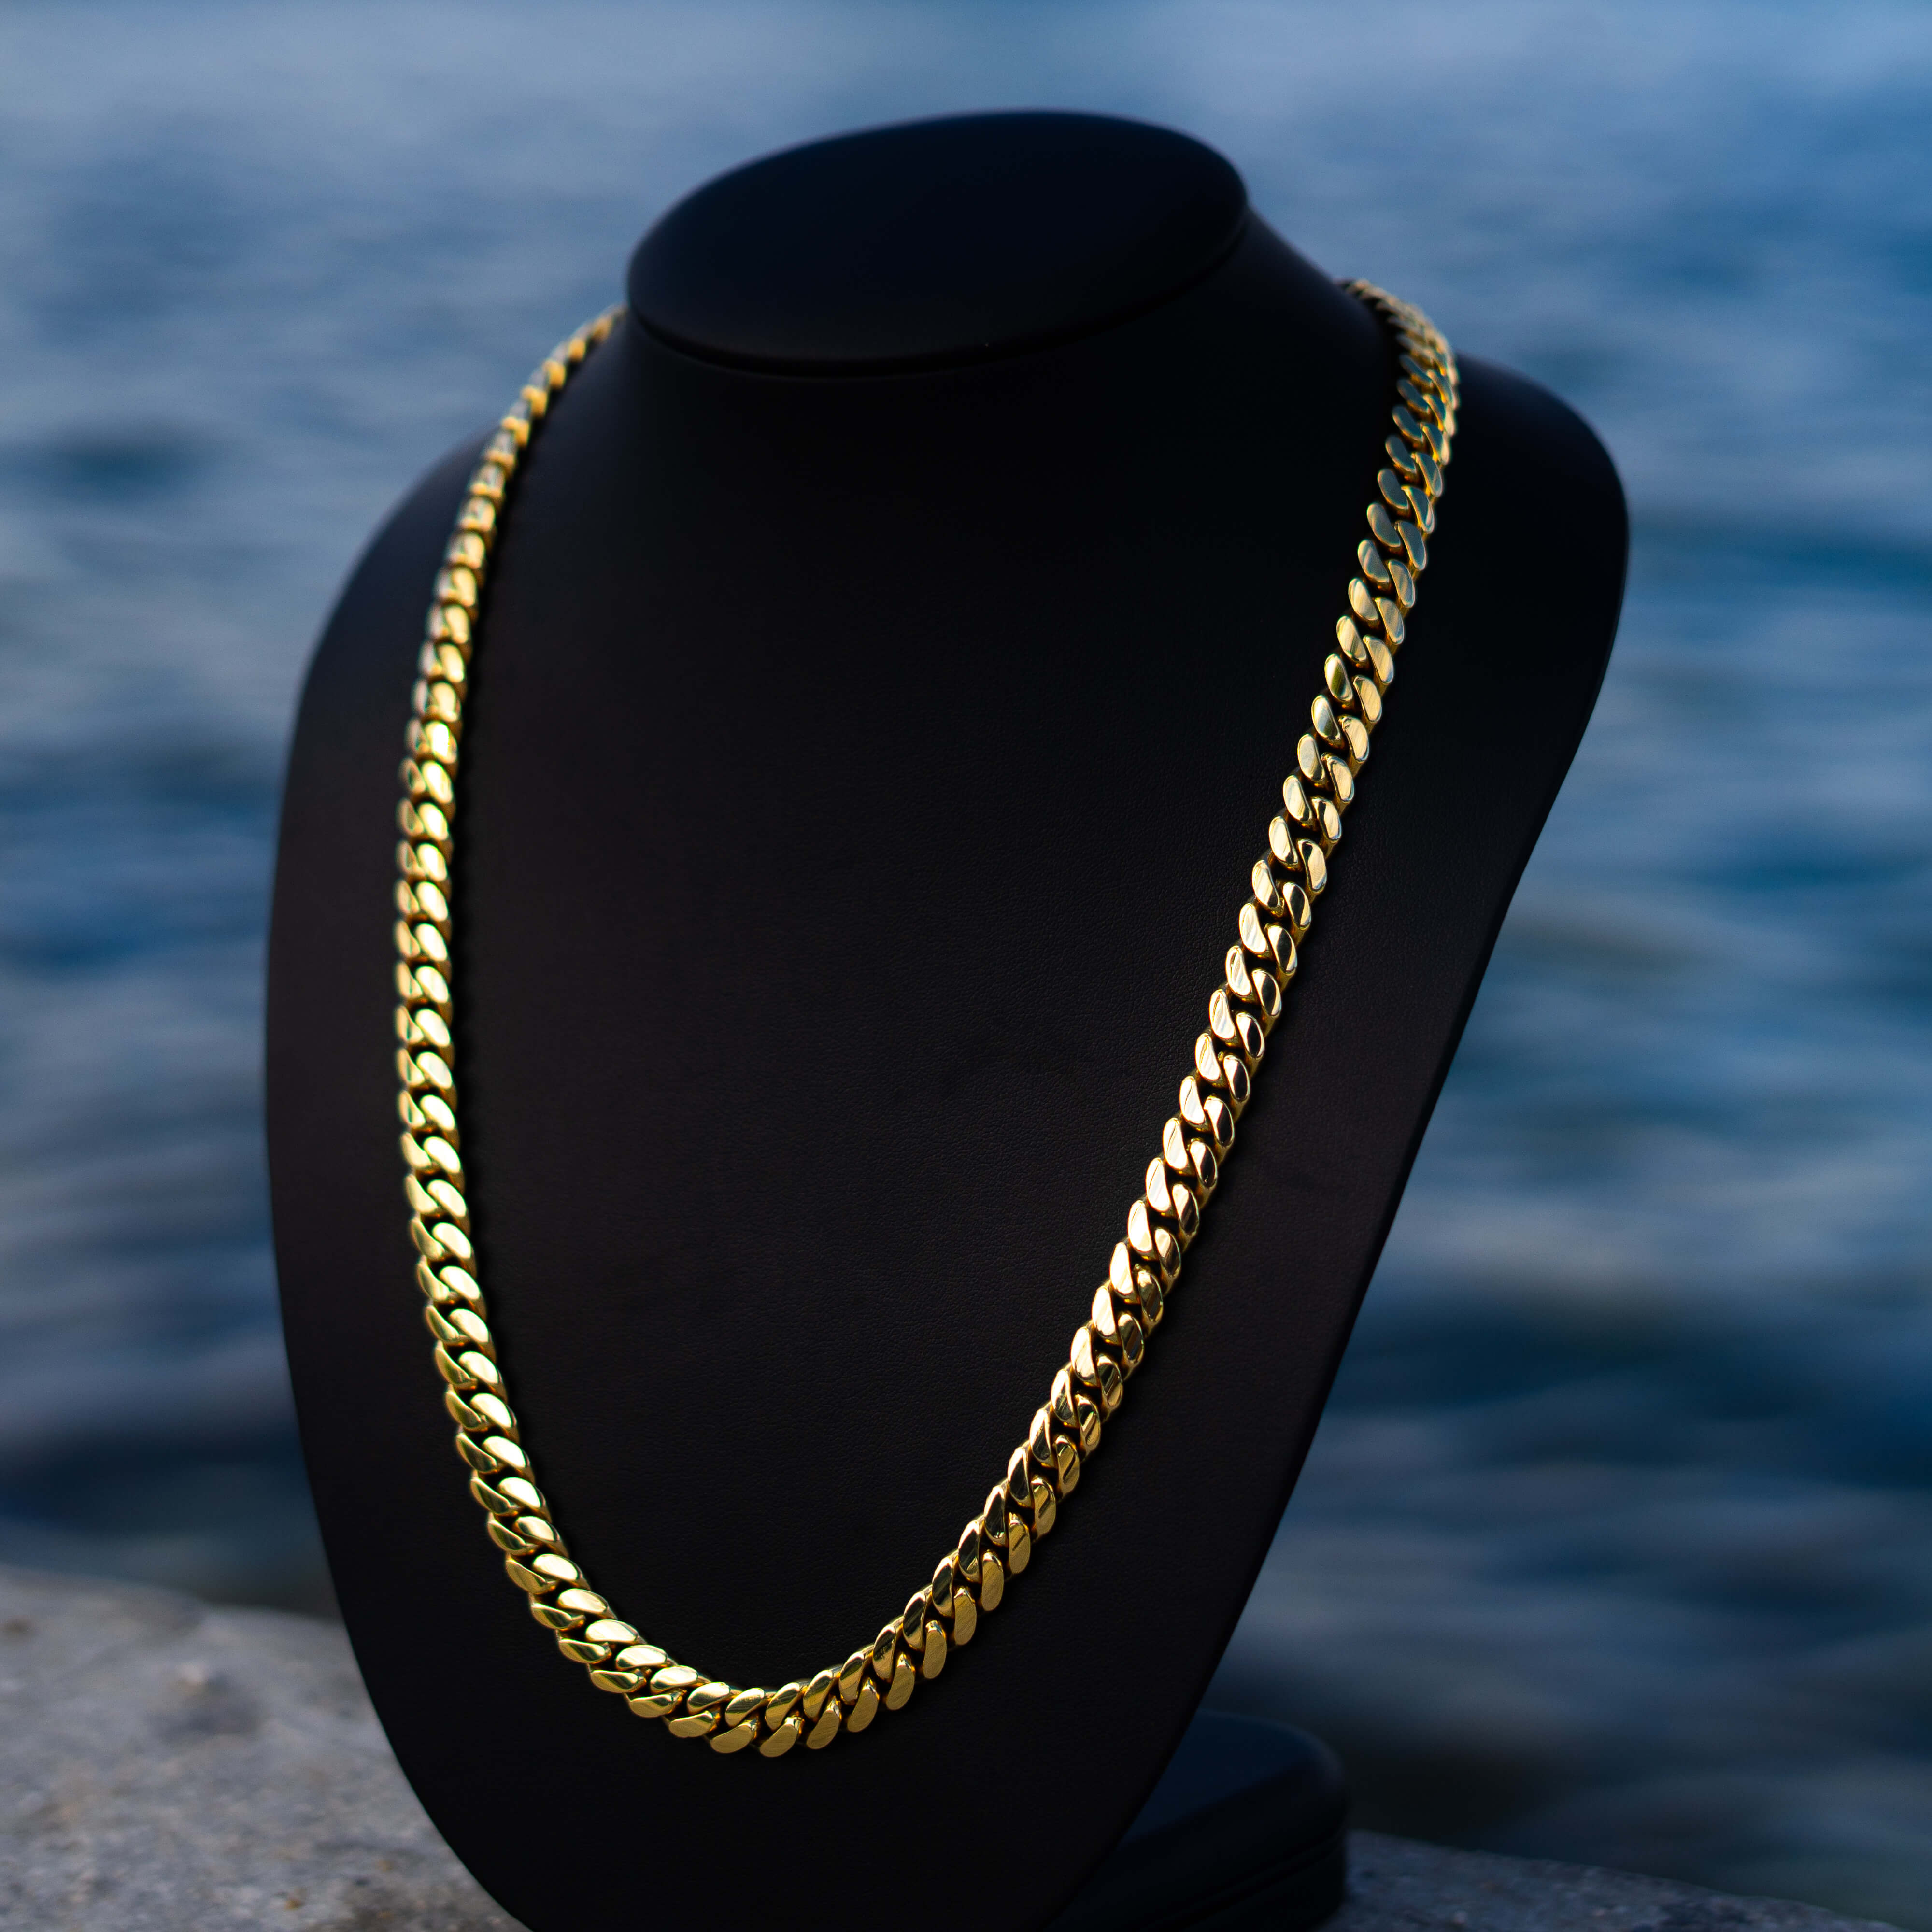 10 MM GOLD OVER SILVER CHAIN